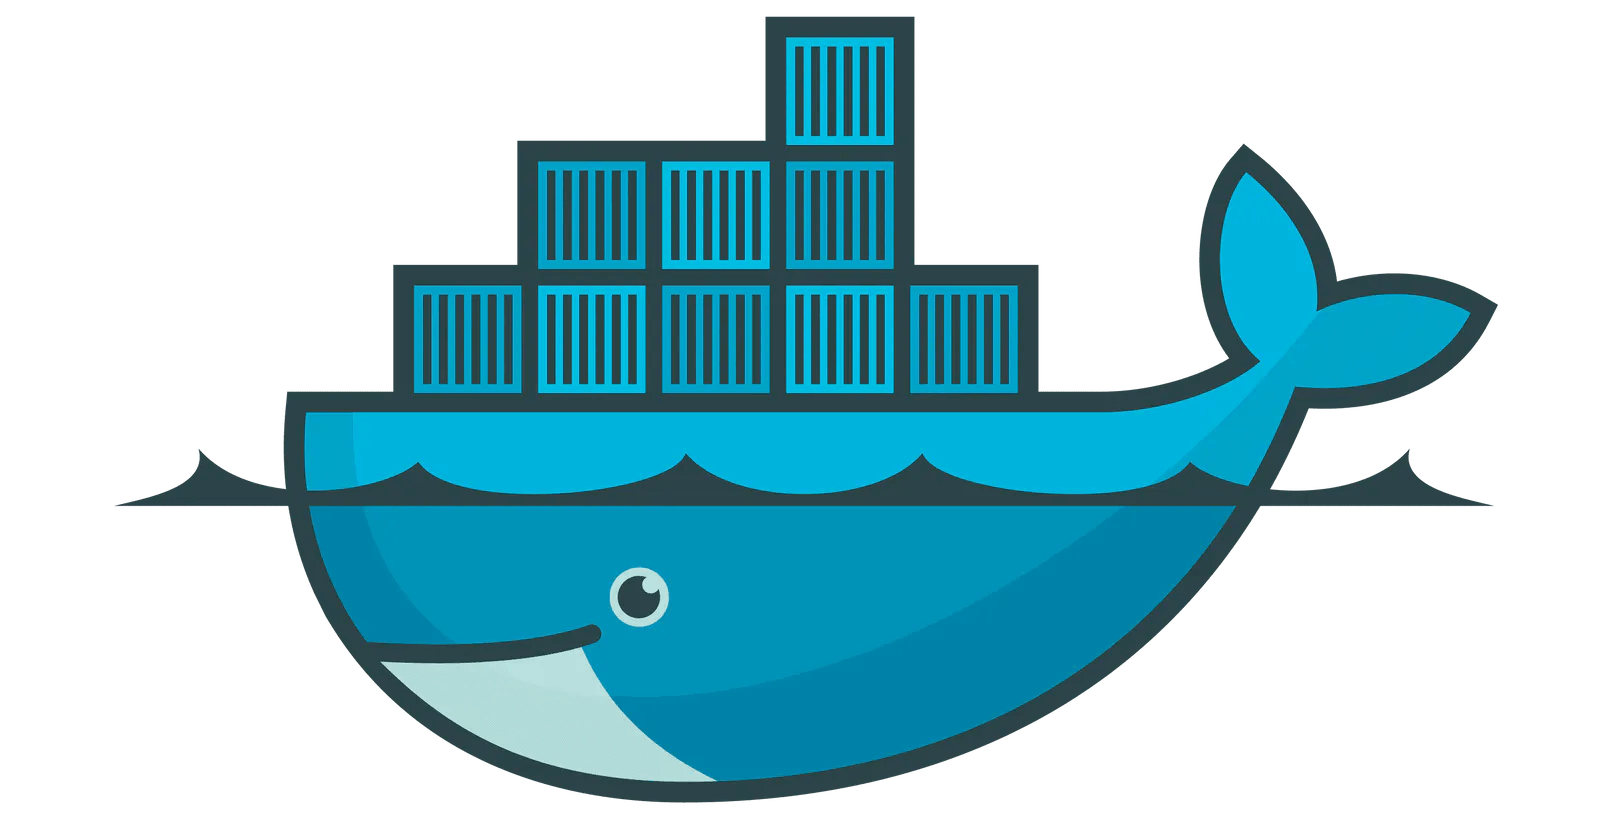 A Beginner-Friendly Introduction to  Docker